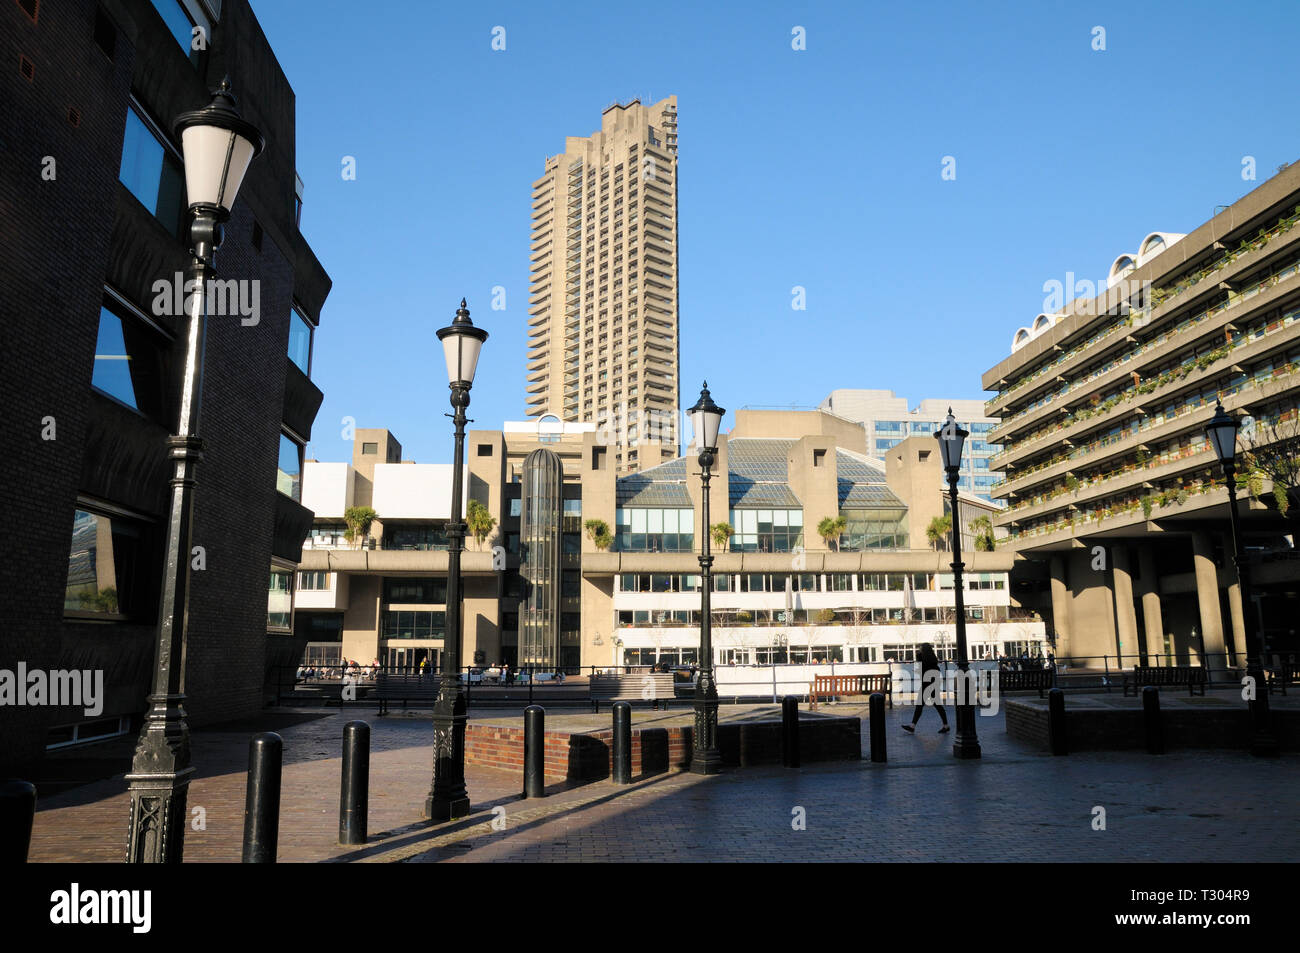 The Barbican Centre and Cromwell Tower on the Barbican Estate, City of London, England, UK Stock Photo